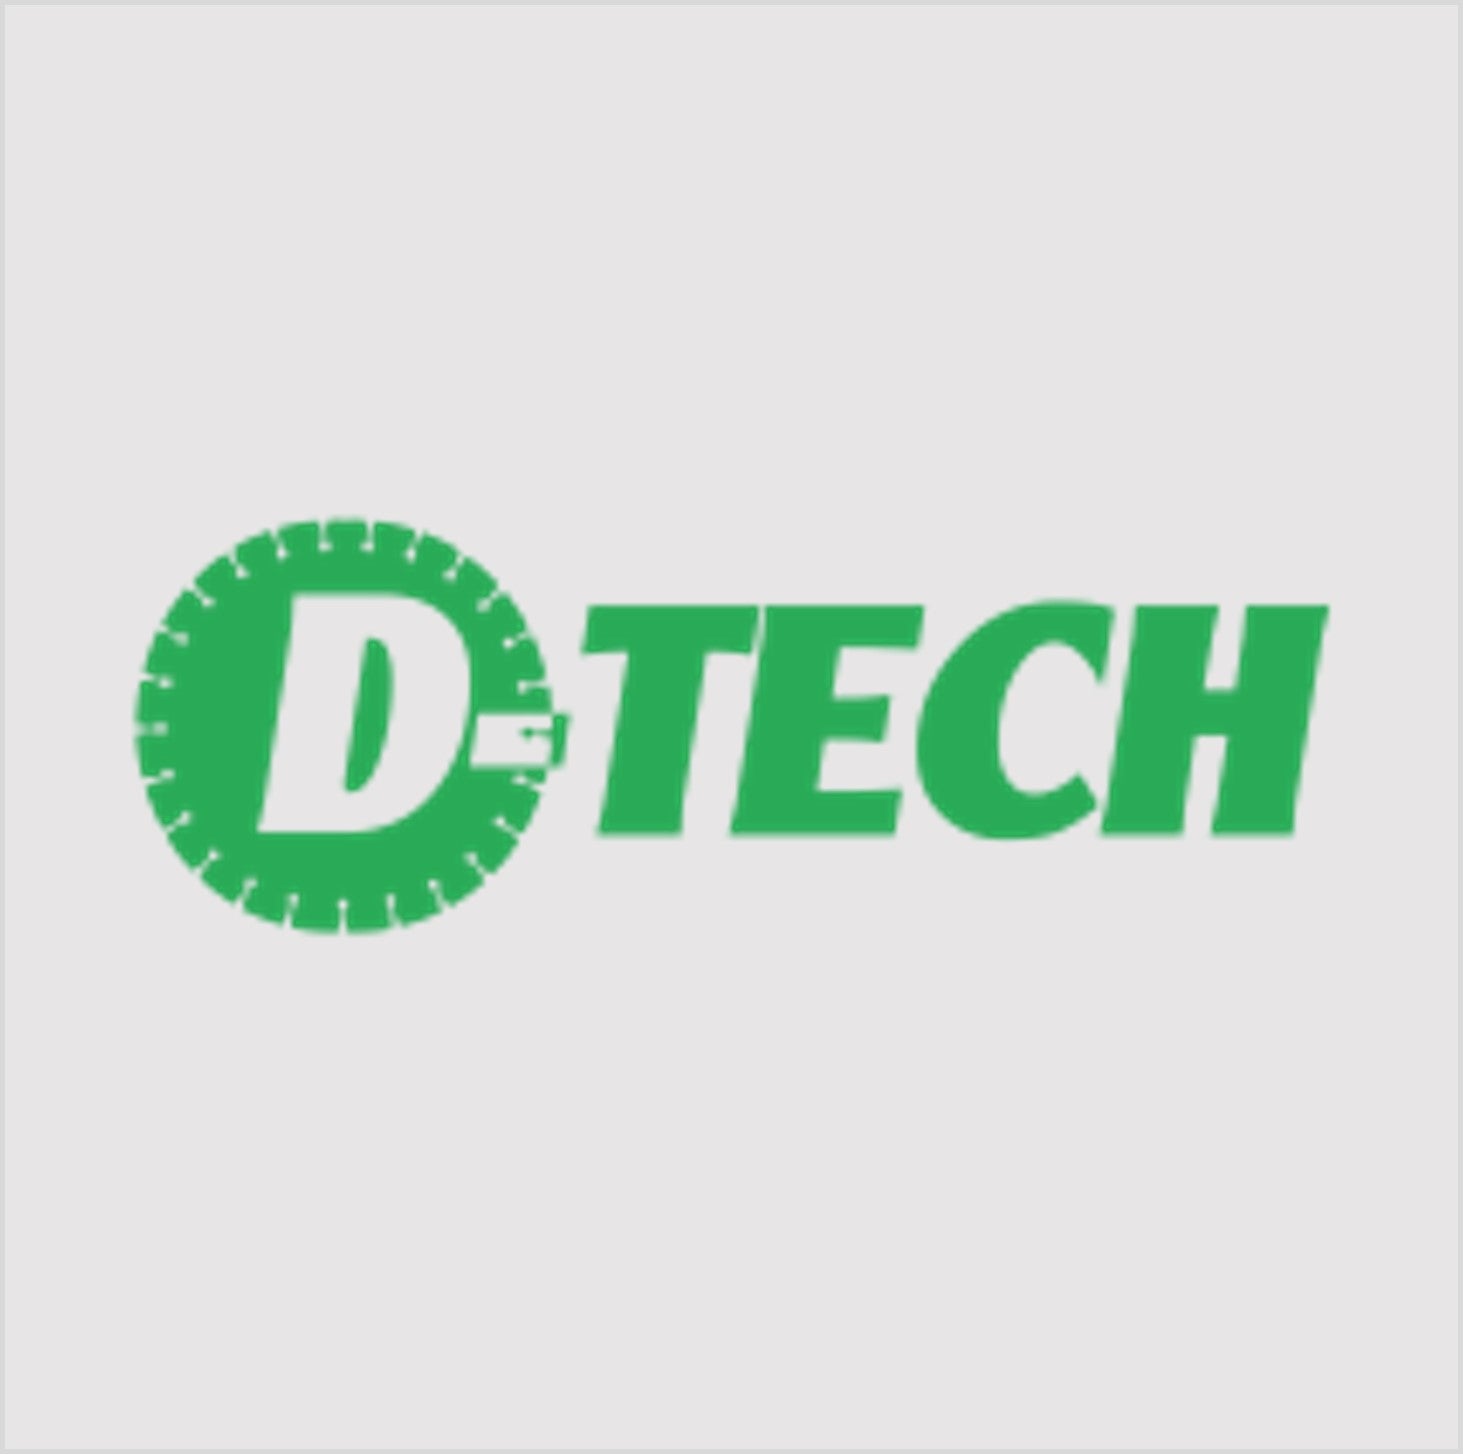 D-TECH-D-Tech-is-a-quality-diamond-cutting-brands-image-of-their-logo-or-trademark-sqr